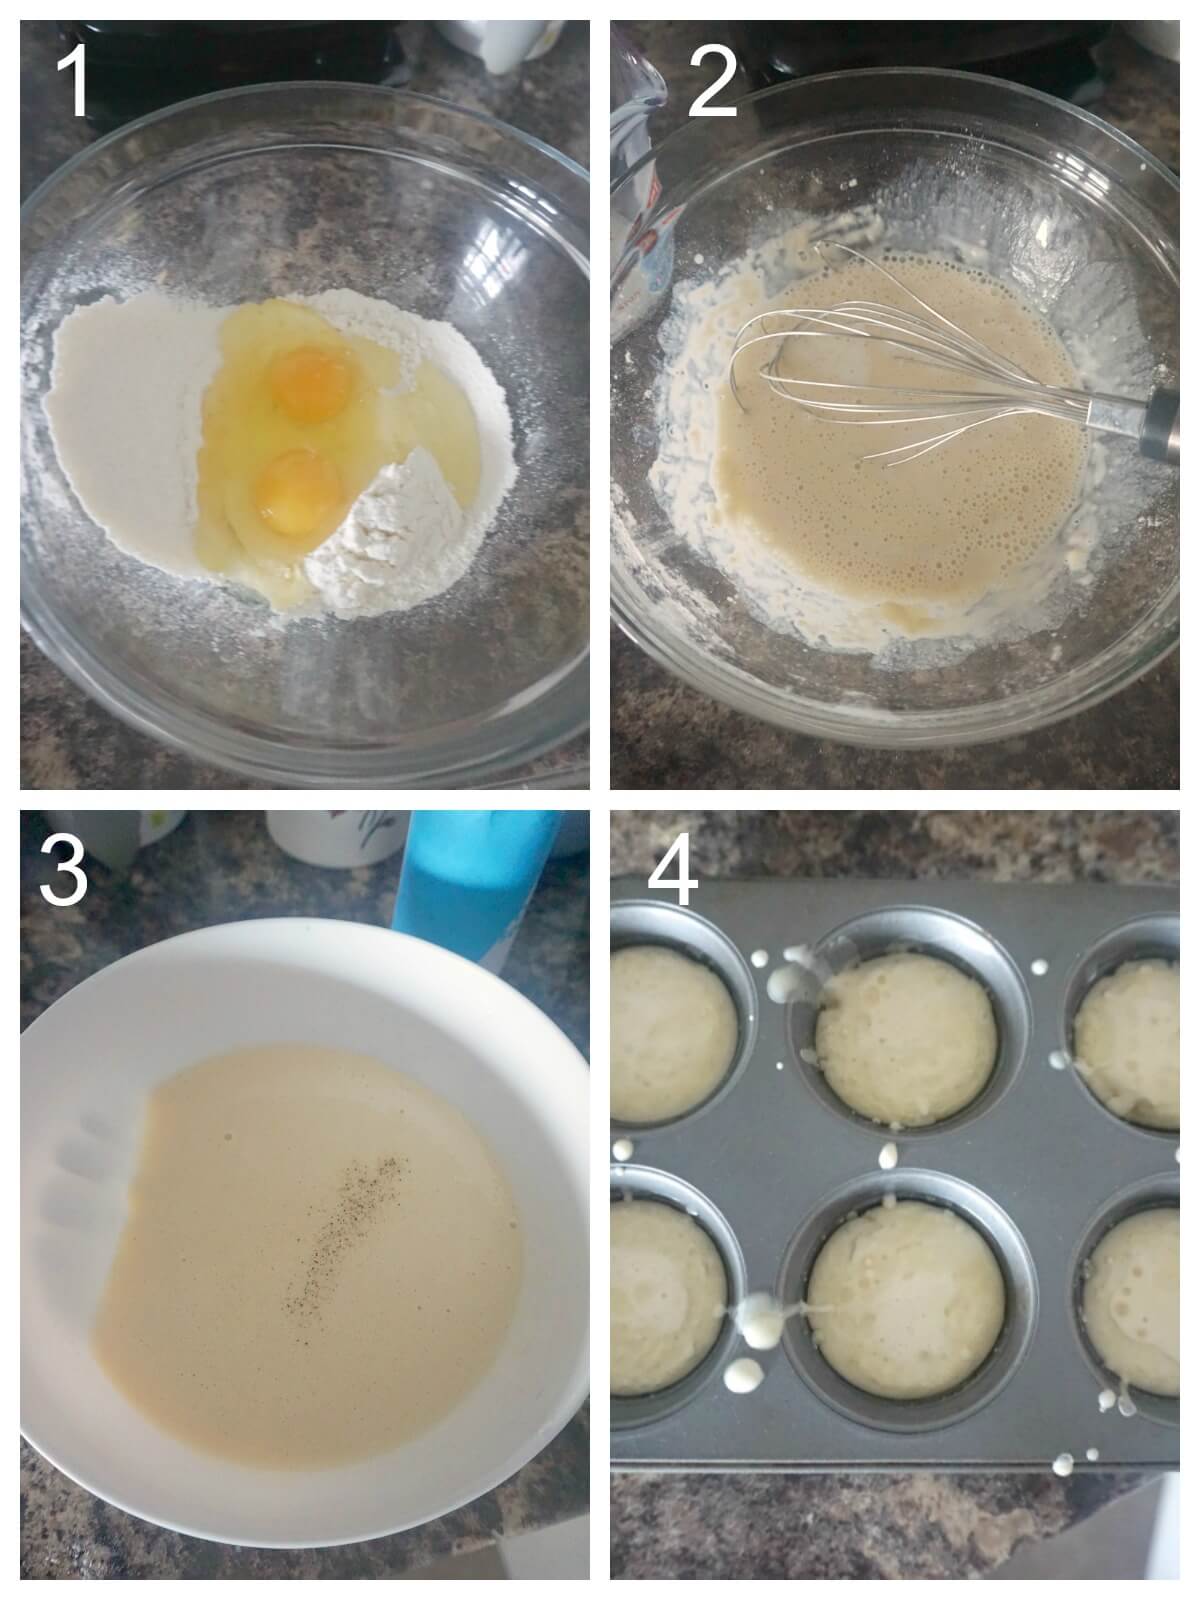 Collage of 4 pictures to show how to make yorkshire puddings.